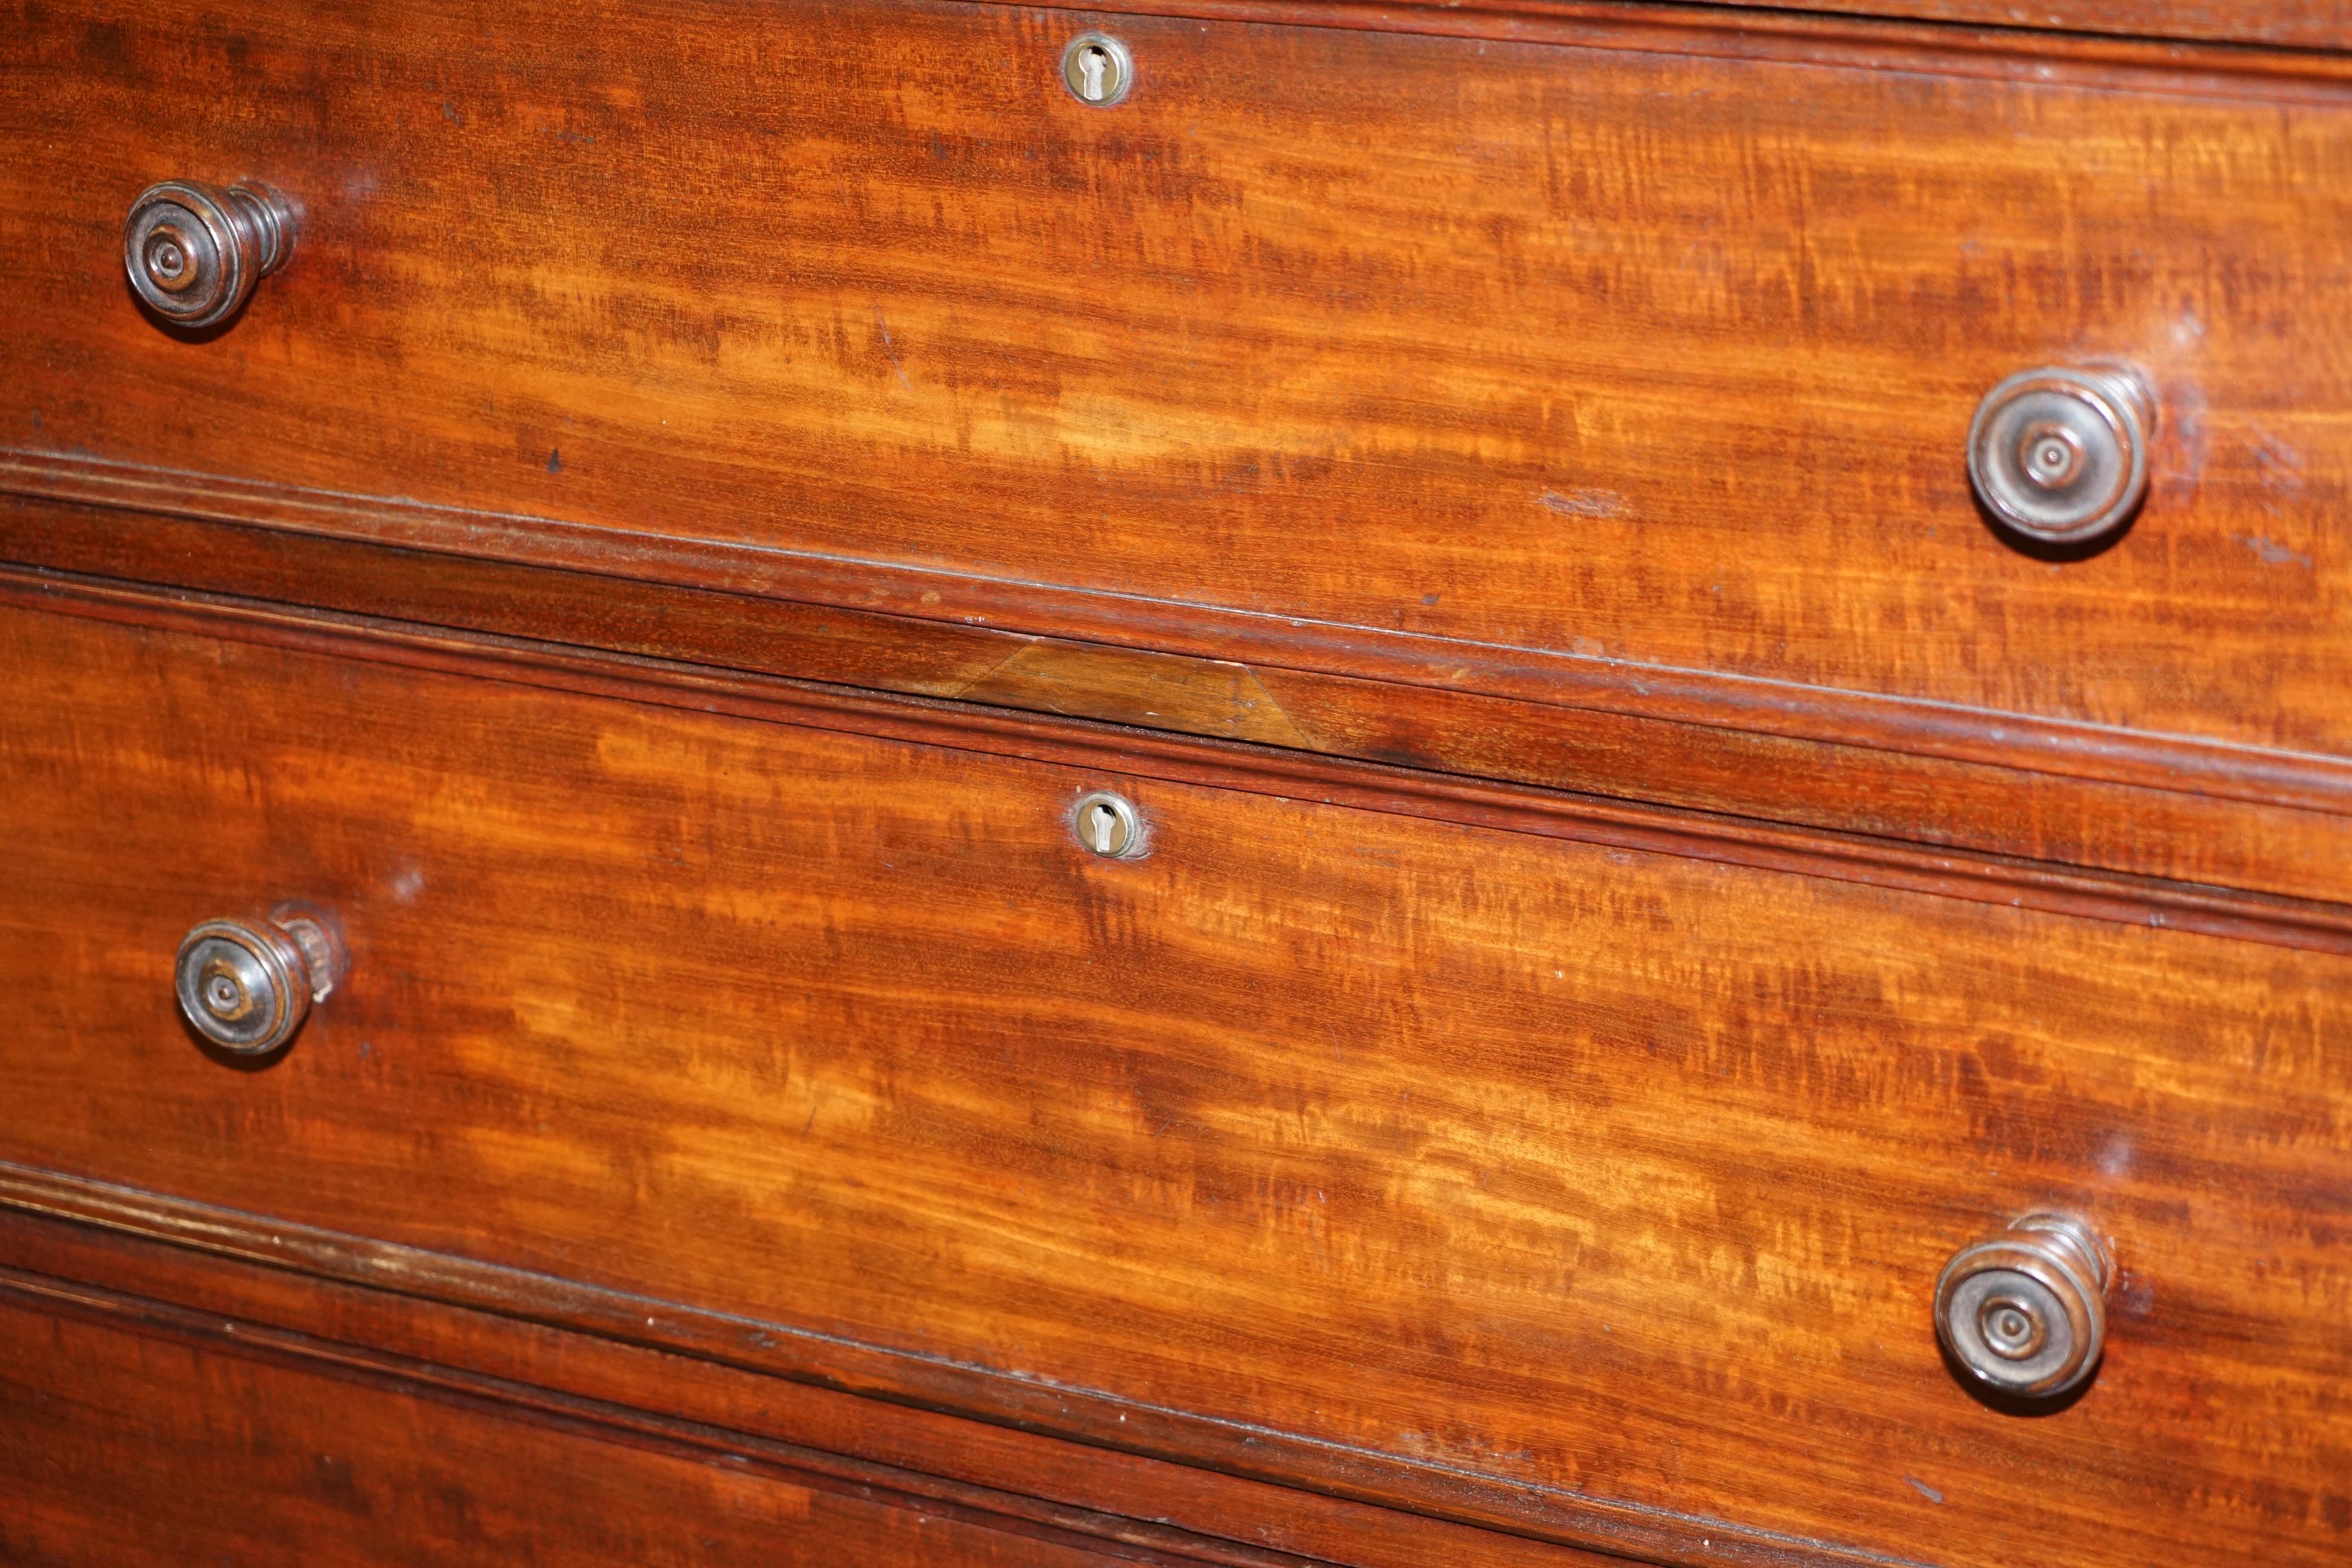 Rare circa 1760 Thomas Wilson 68 Great Queen Street Hardwood Chest of Drawers For Sale 6